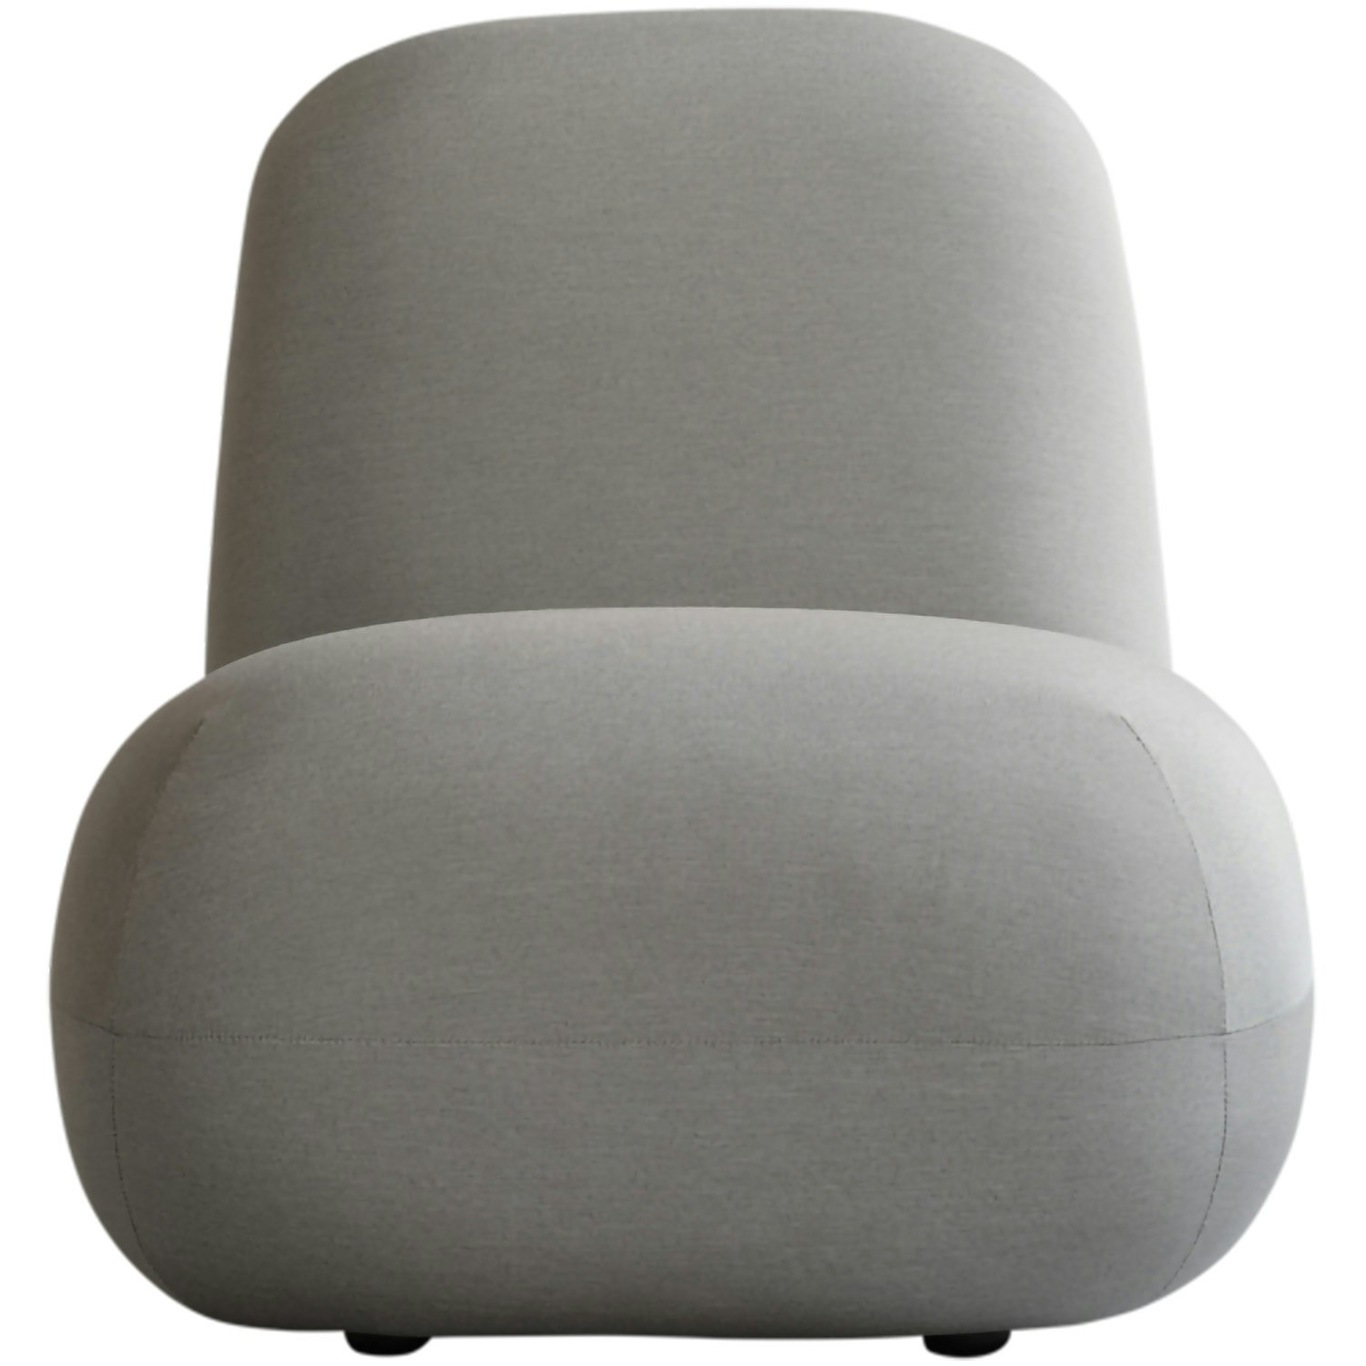 Toe Flat Armchair, Taupe